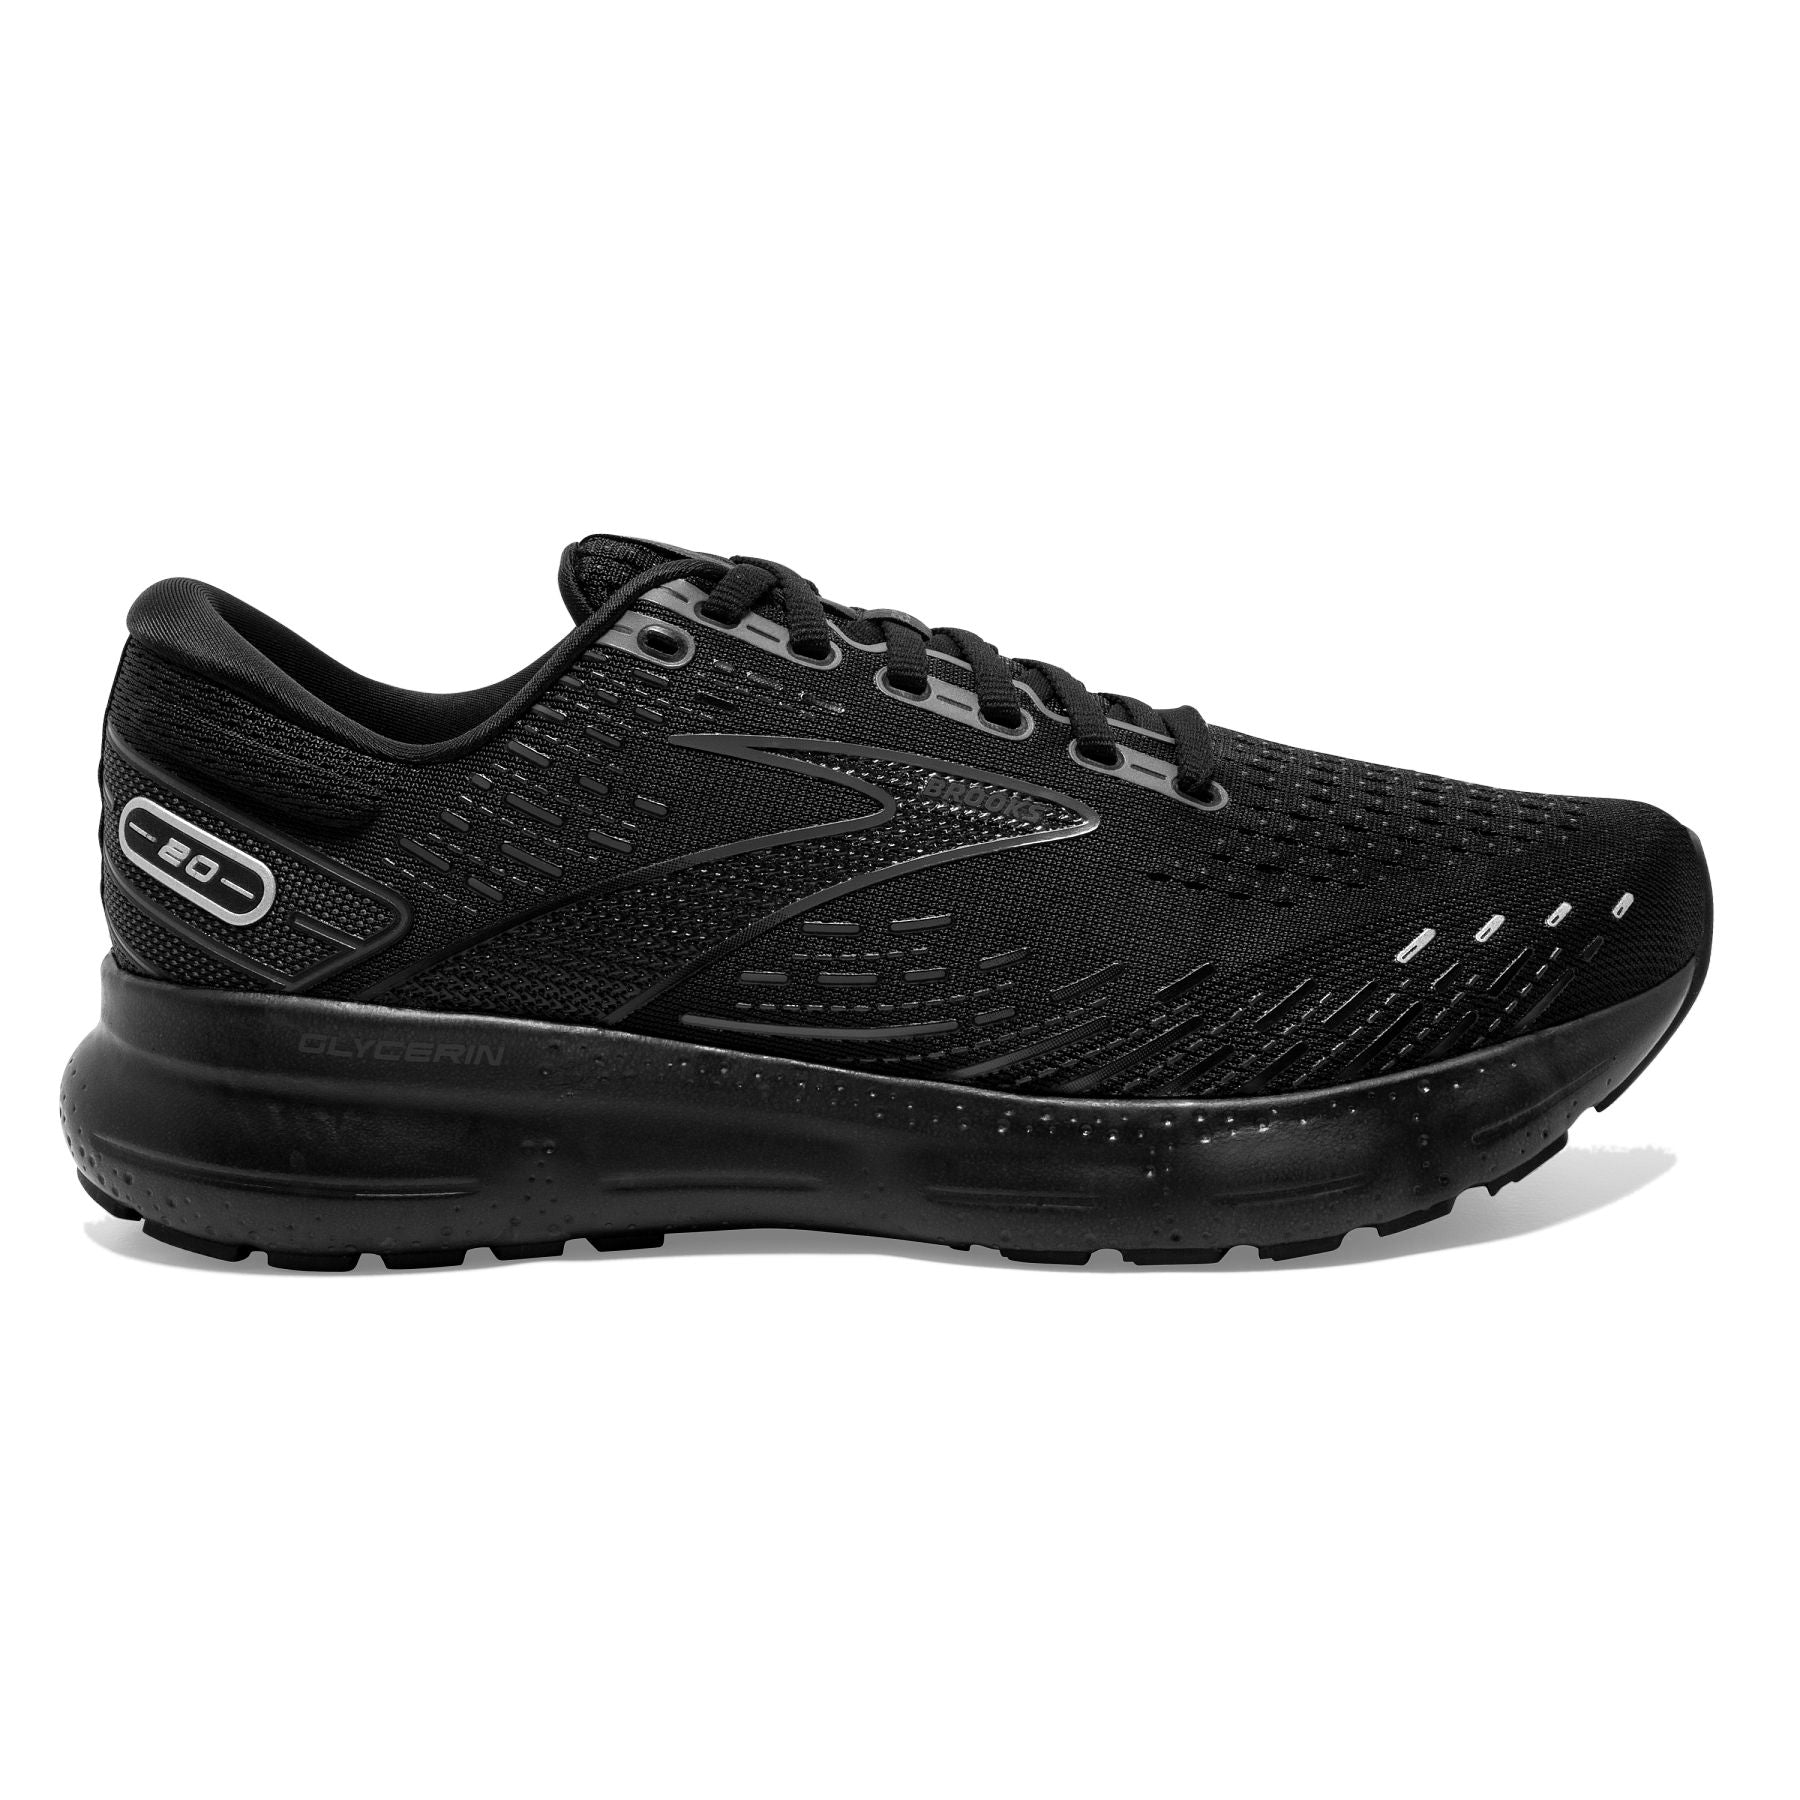 Lateral view of the Men's Glycerin 20 in all Black, wide "2E" width